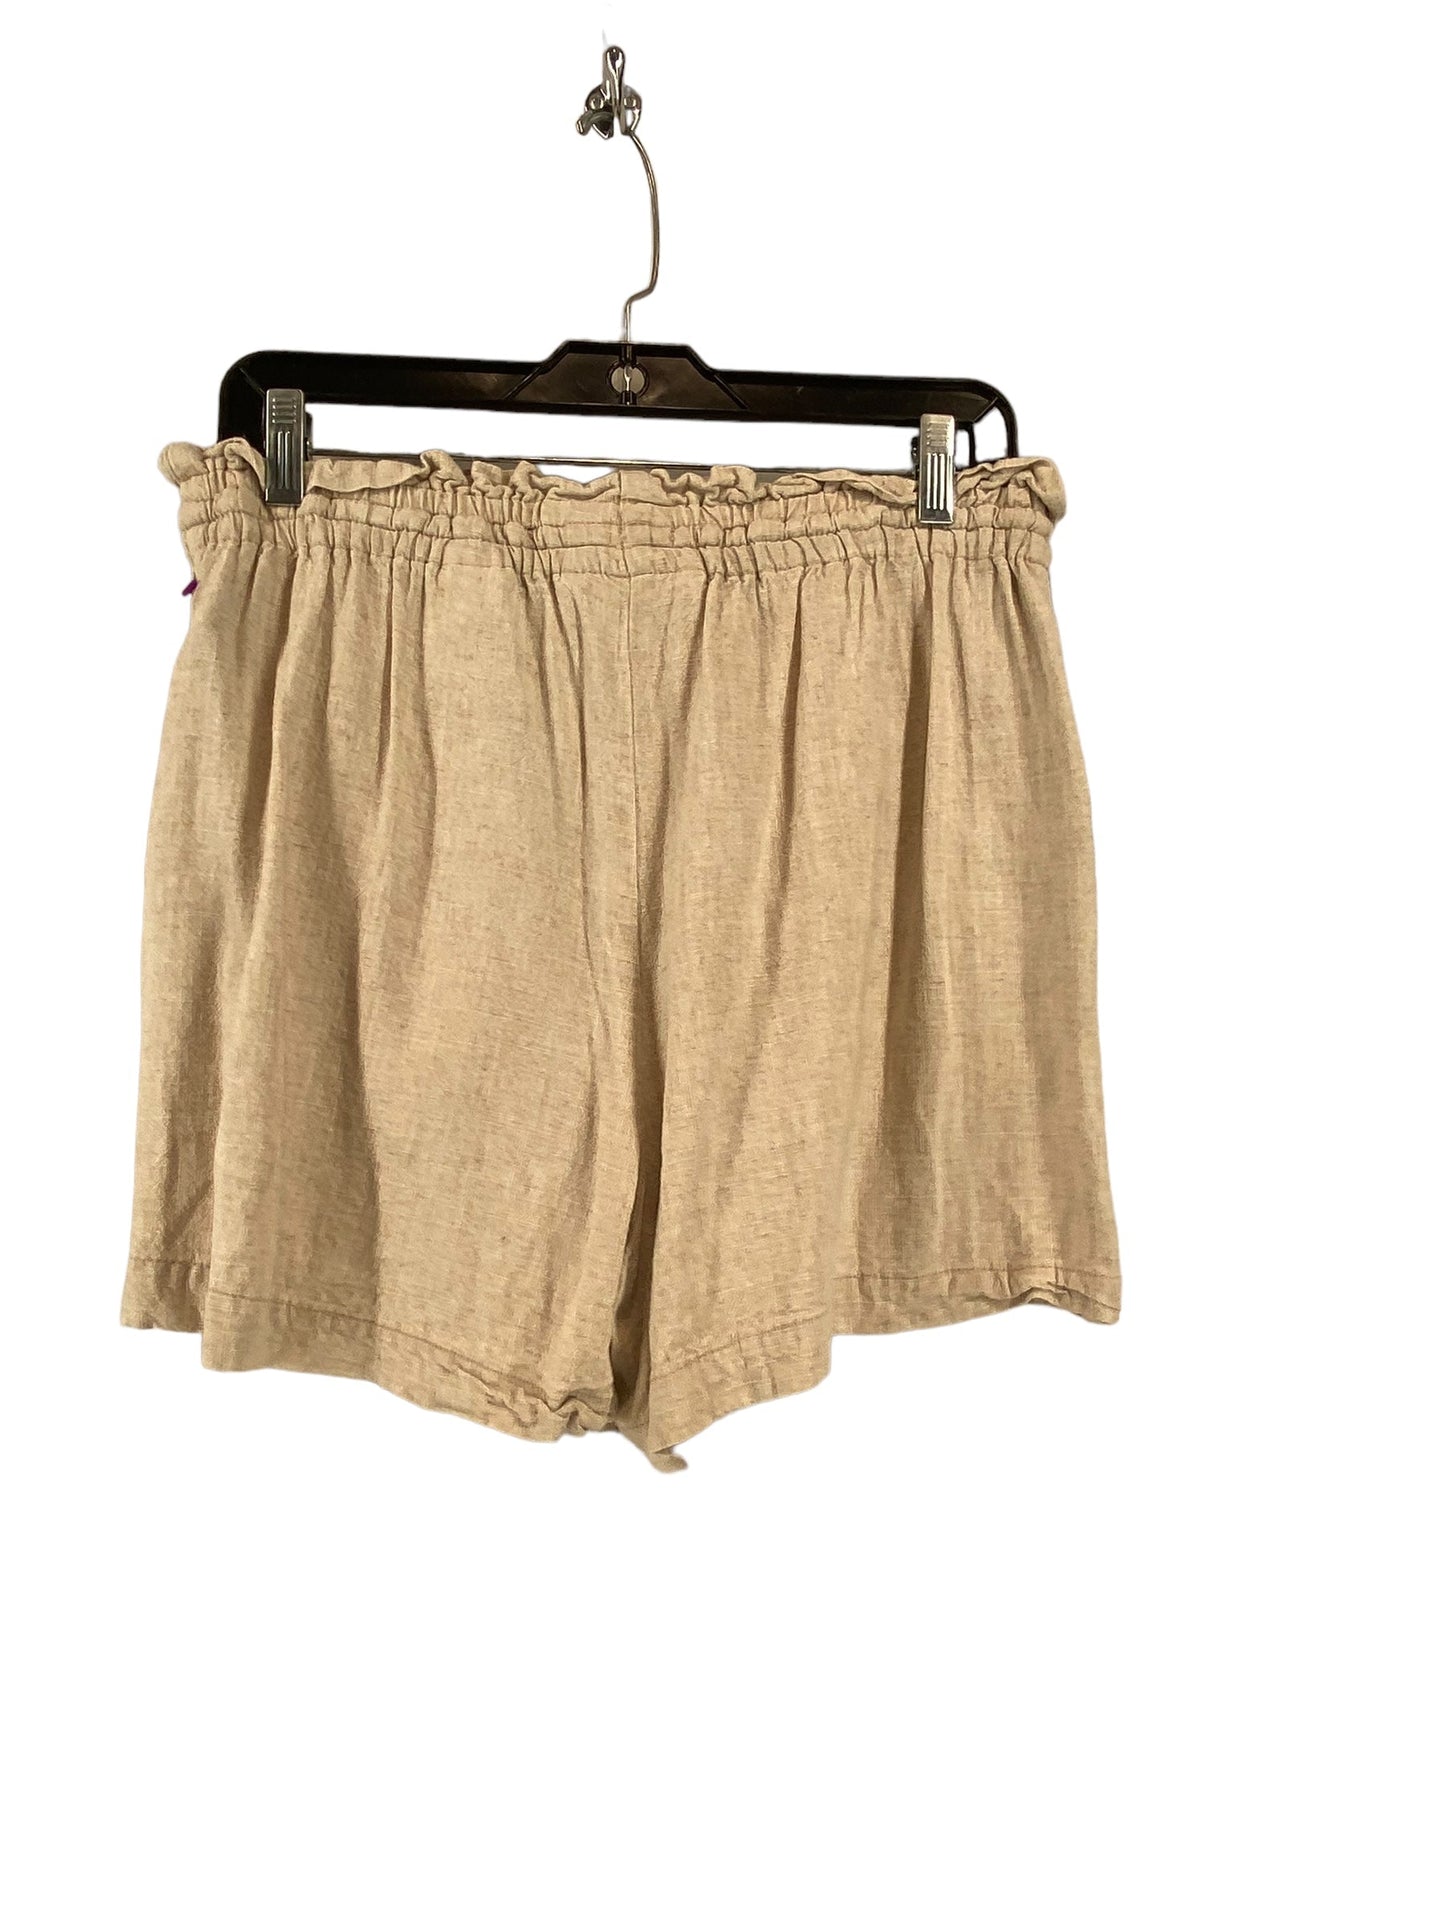 Shorts By H&m  Size: M